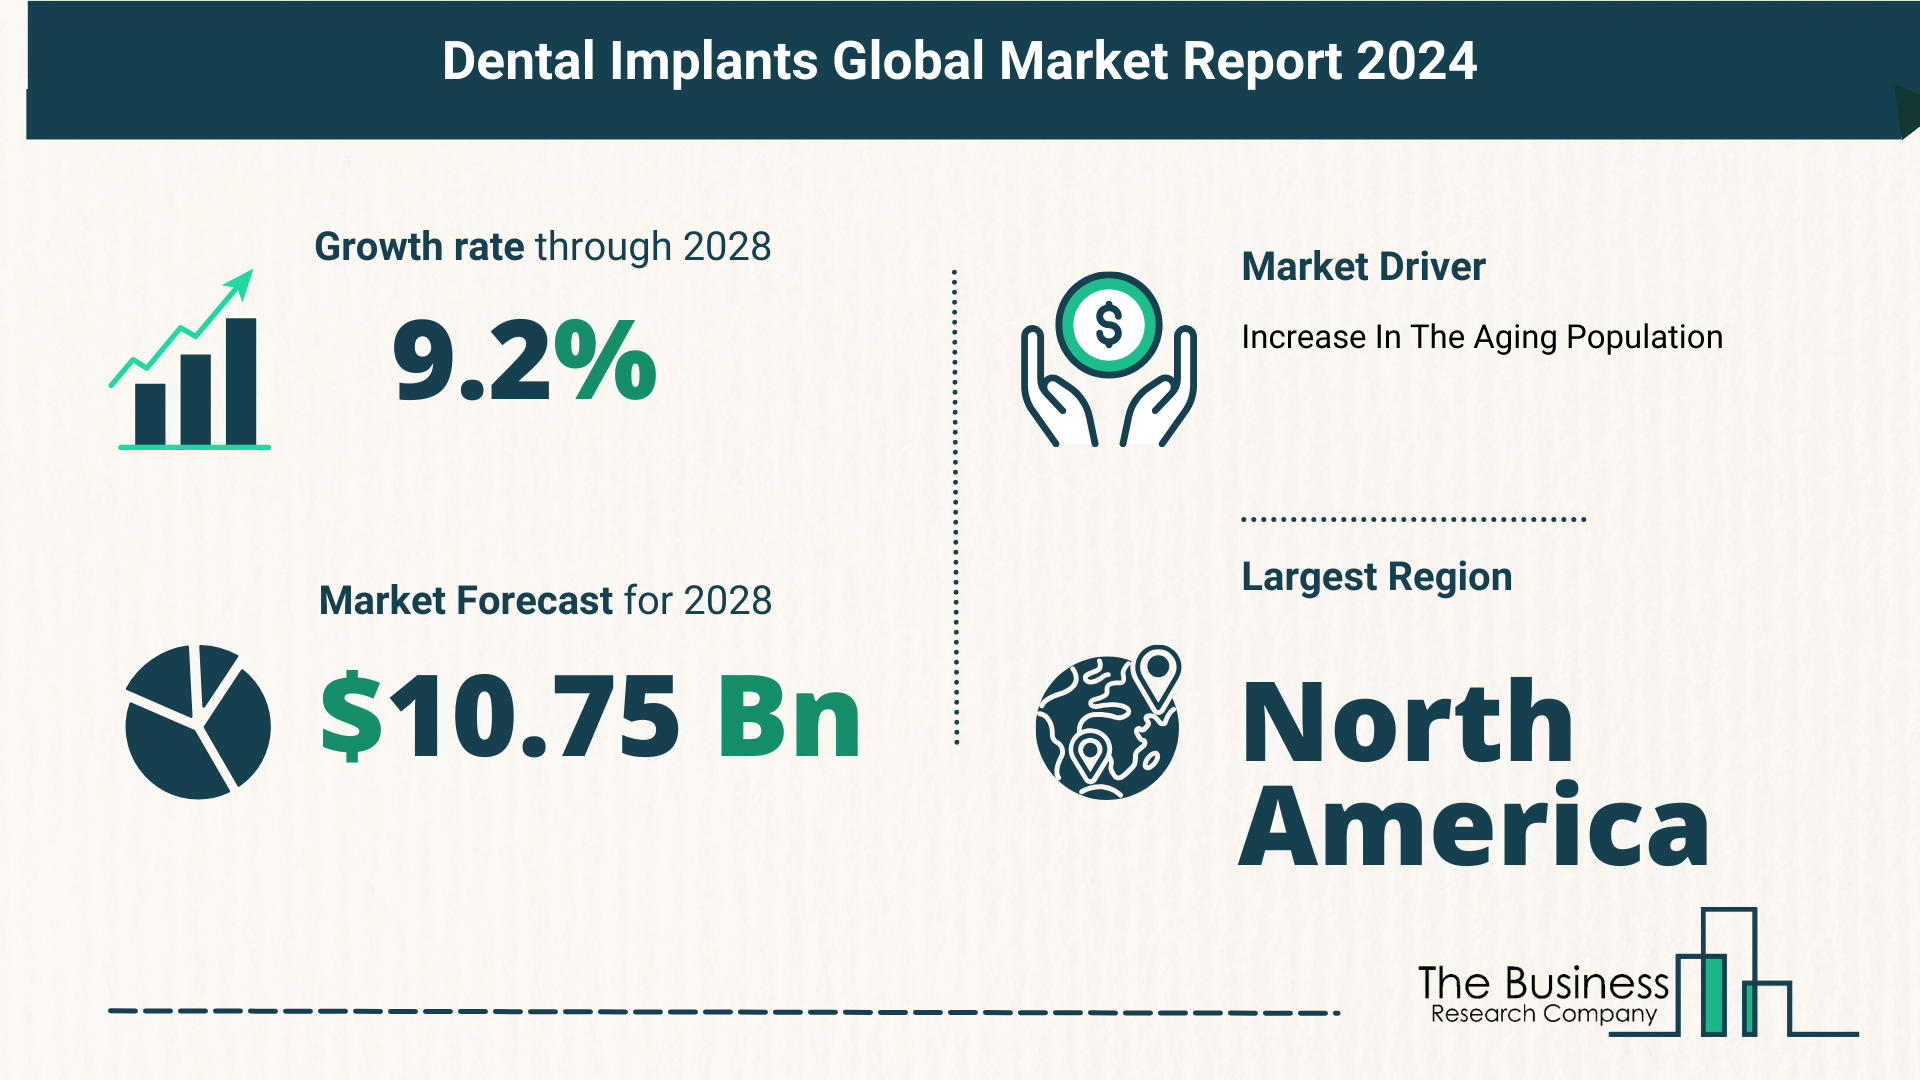 Key Trends And Drivers In The Dental Implants Market 2024